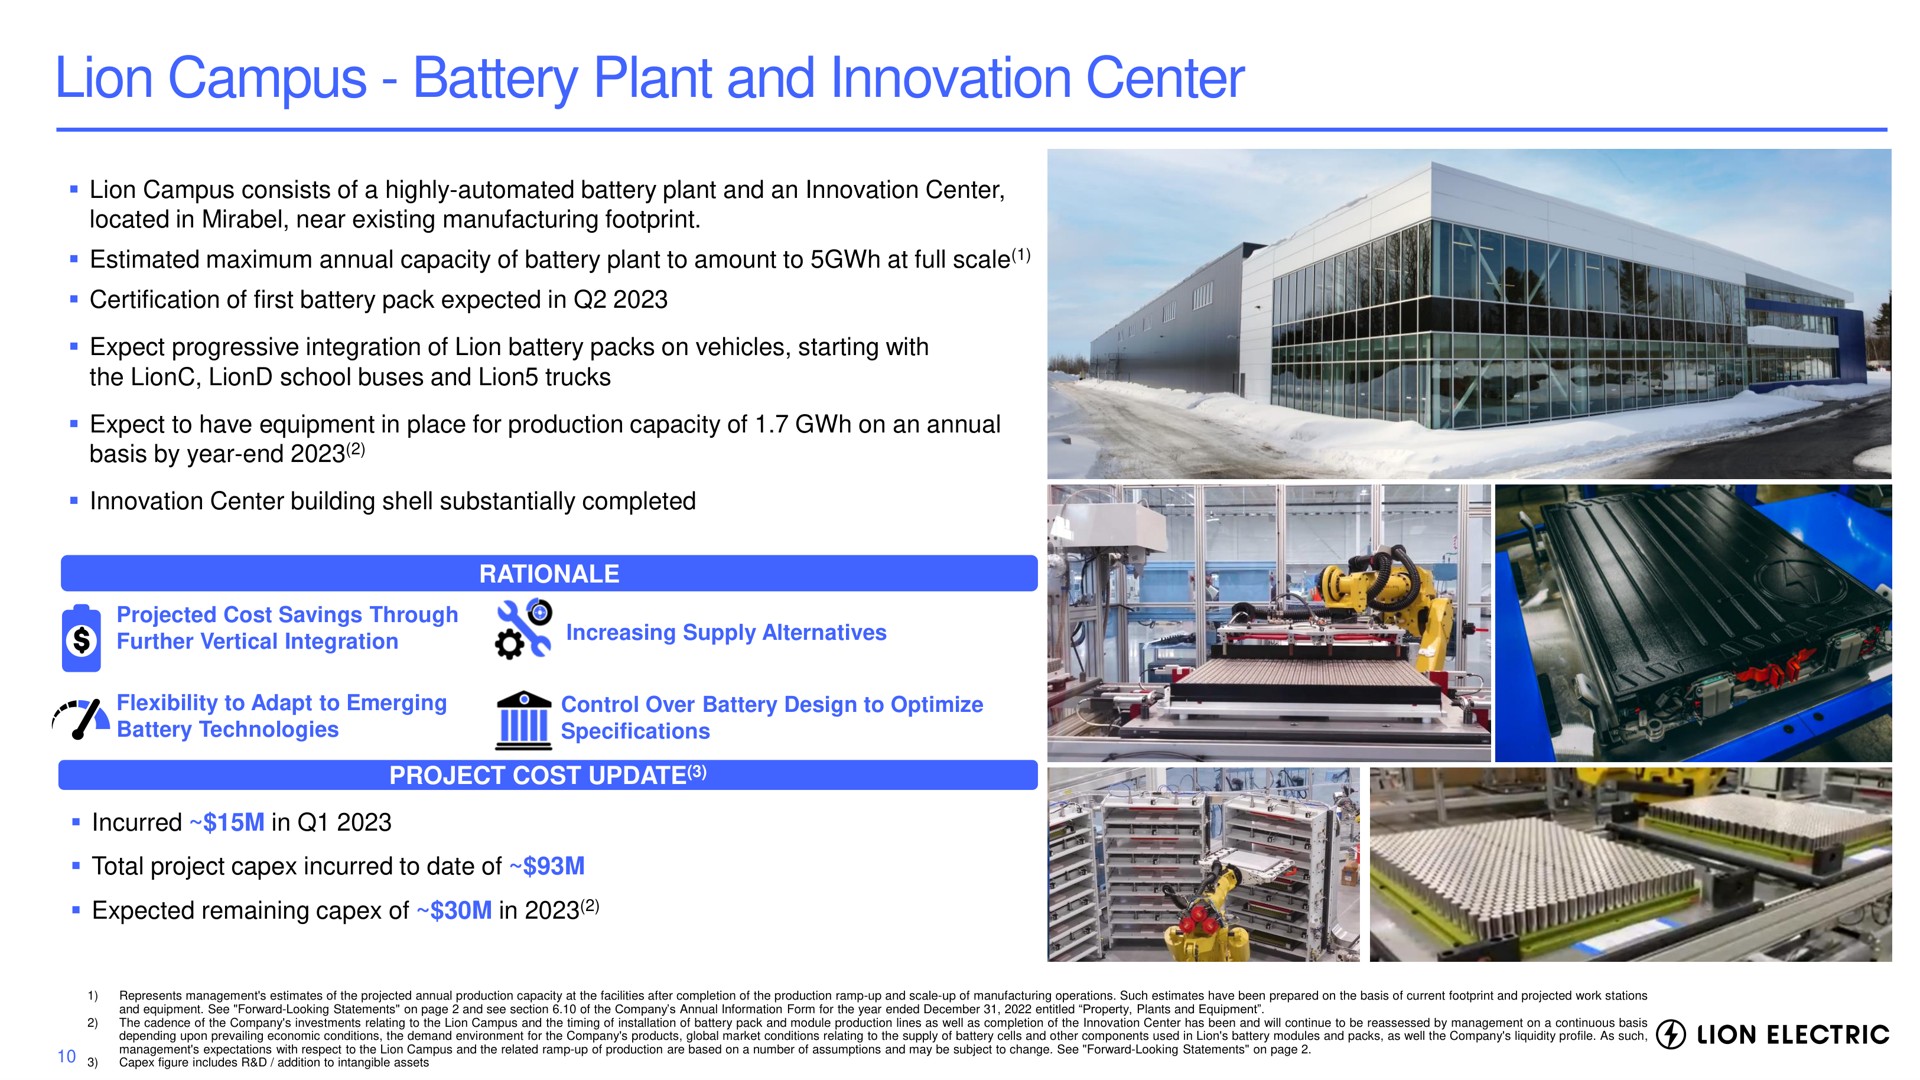 lion campus battery plant and innovation center located in near existing manufacturing footprint expect progressive integration of packs on vehicles starting with the school buses lion trucks expect to have equipment in place for production capacity of on an annual basis by year end further vertical integration increasing supply alternatives rationale project cost update incurred in expected remaining of in | Lion Electric